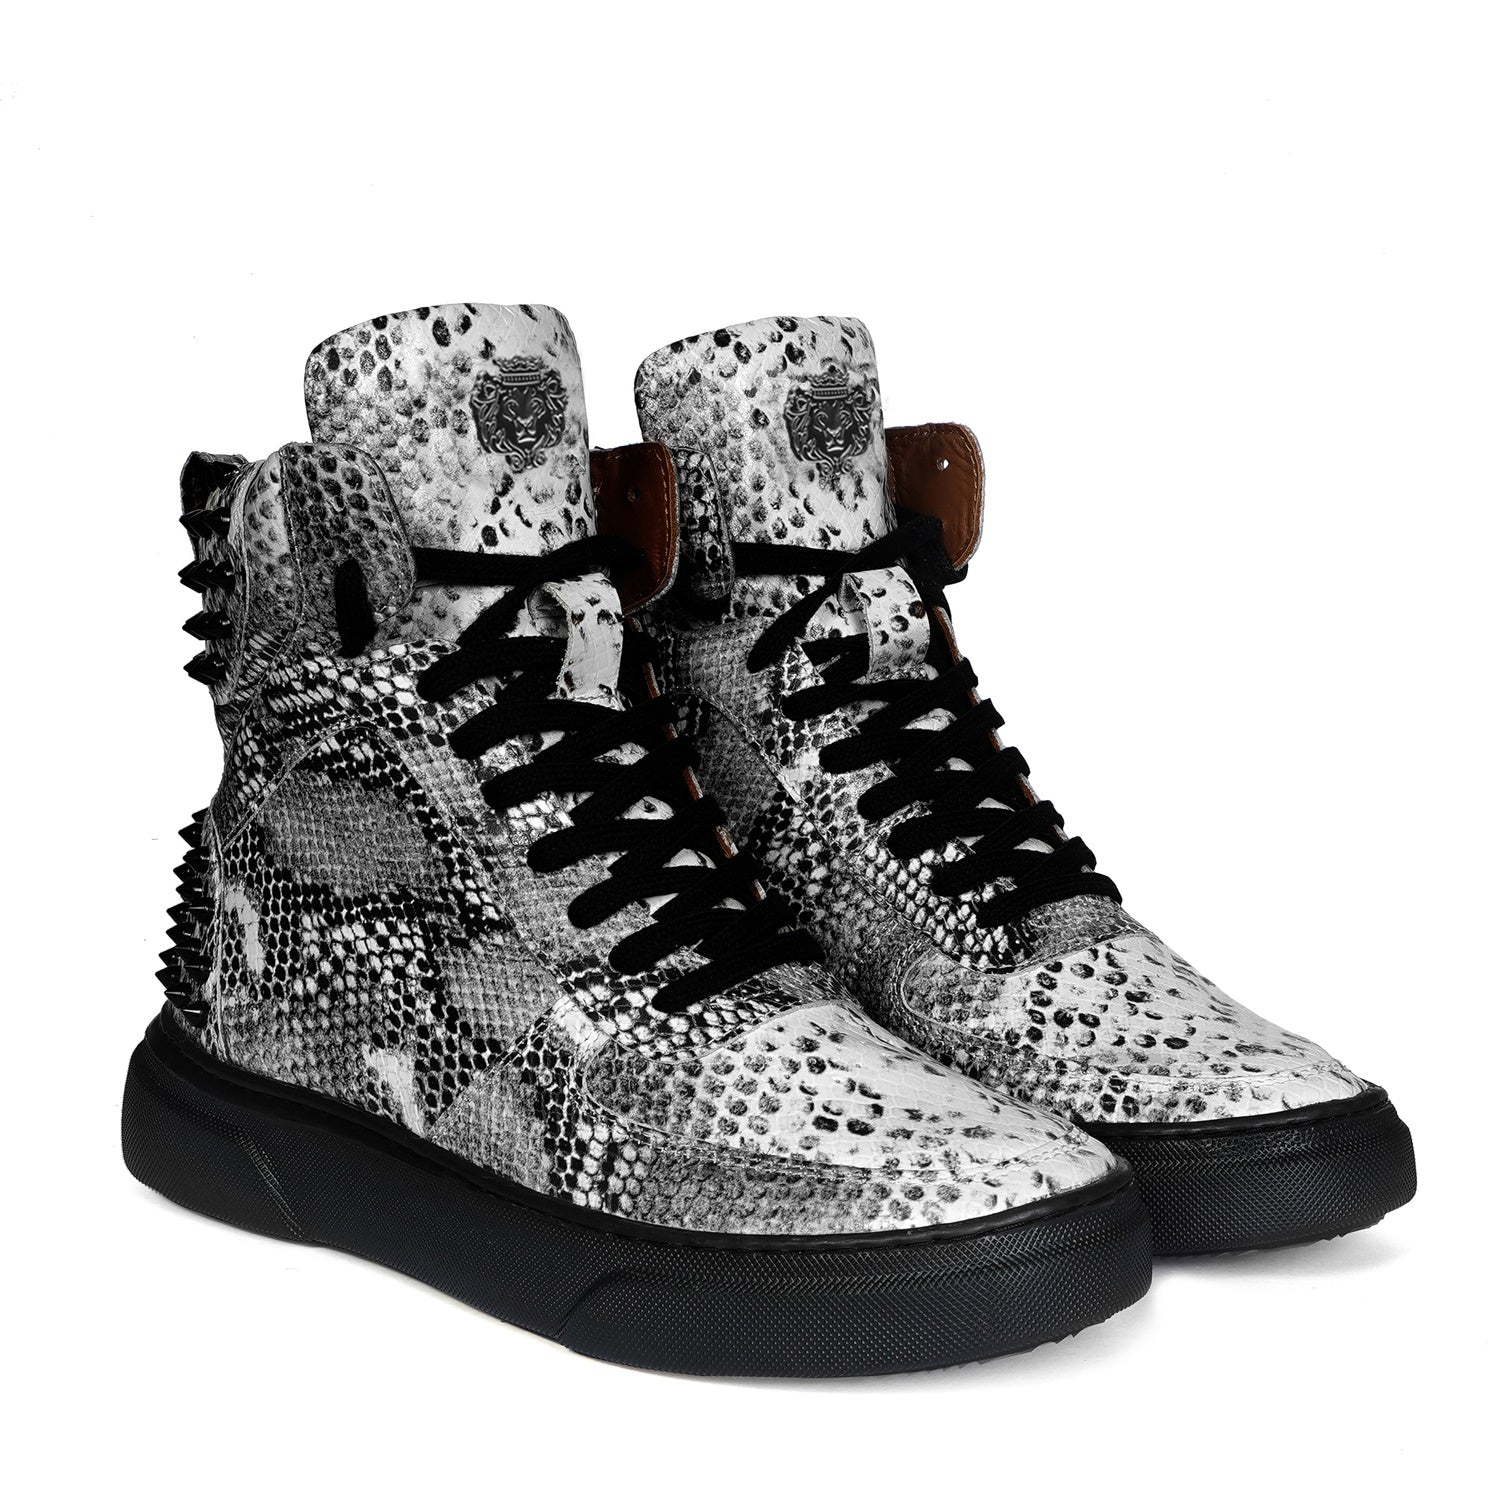 Buy Inflation Brand Flex Force High Top Casual Sneakers for Men (6_Black)  at Amazon.in